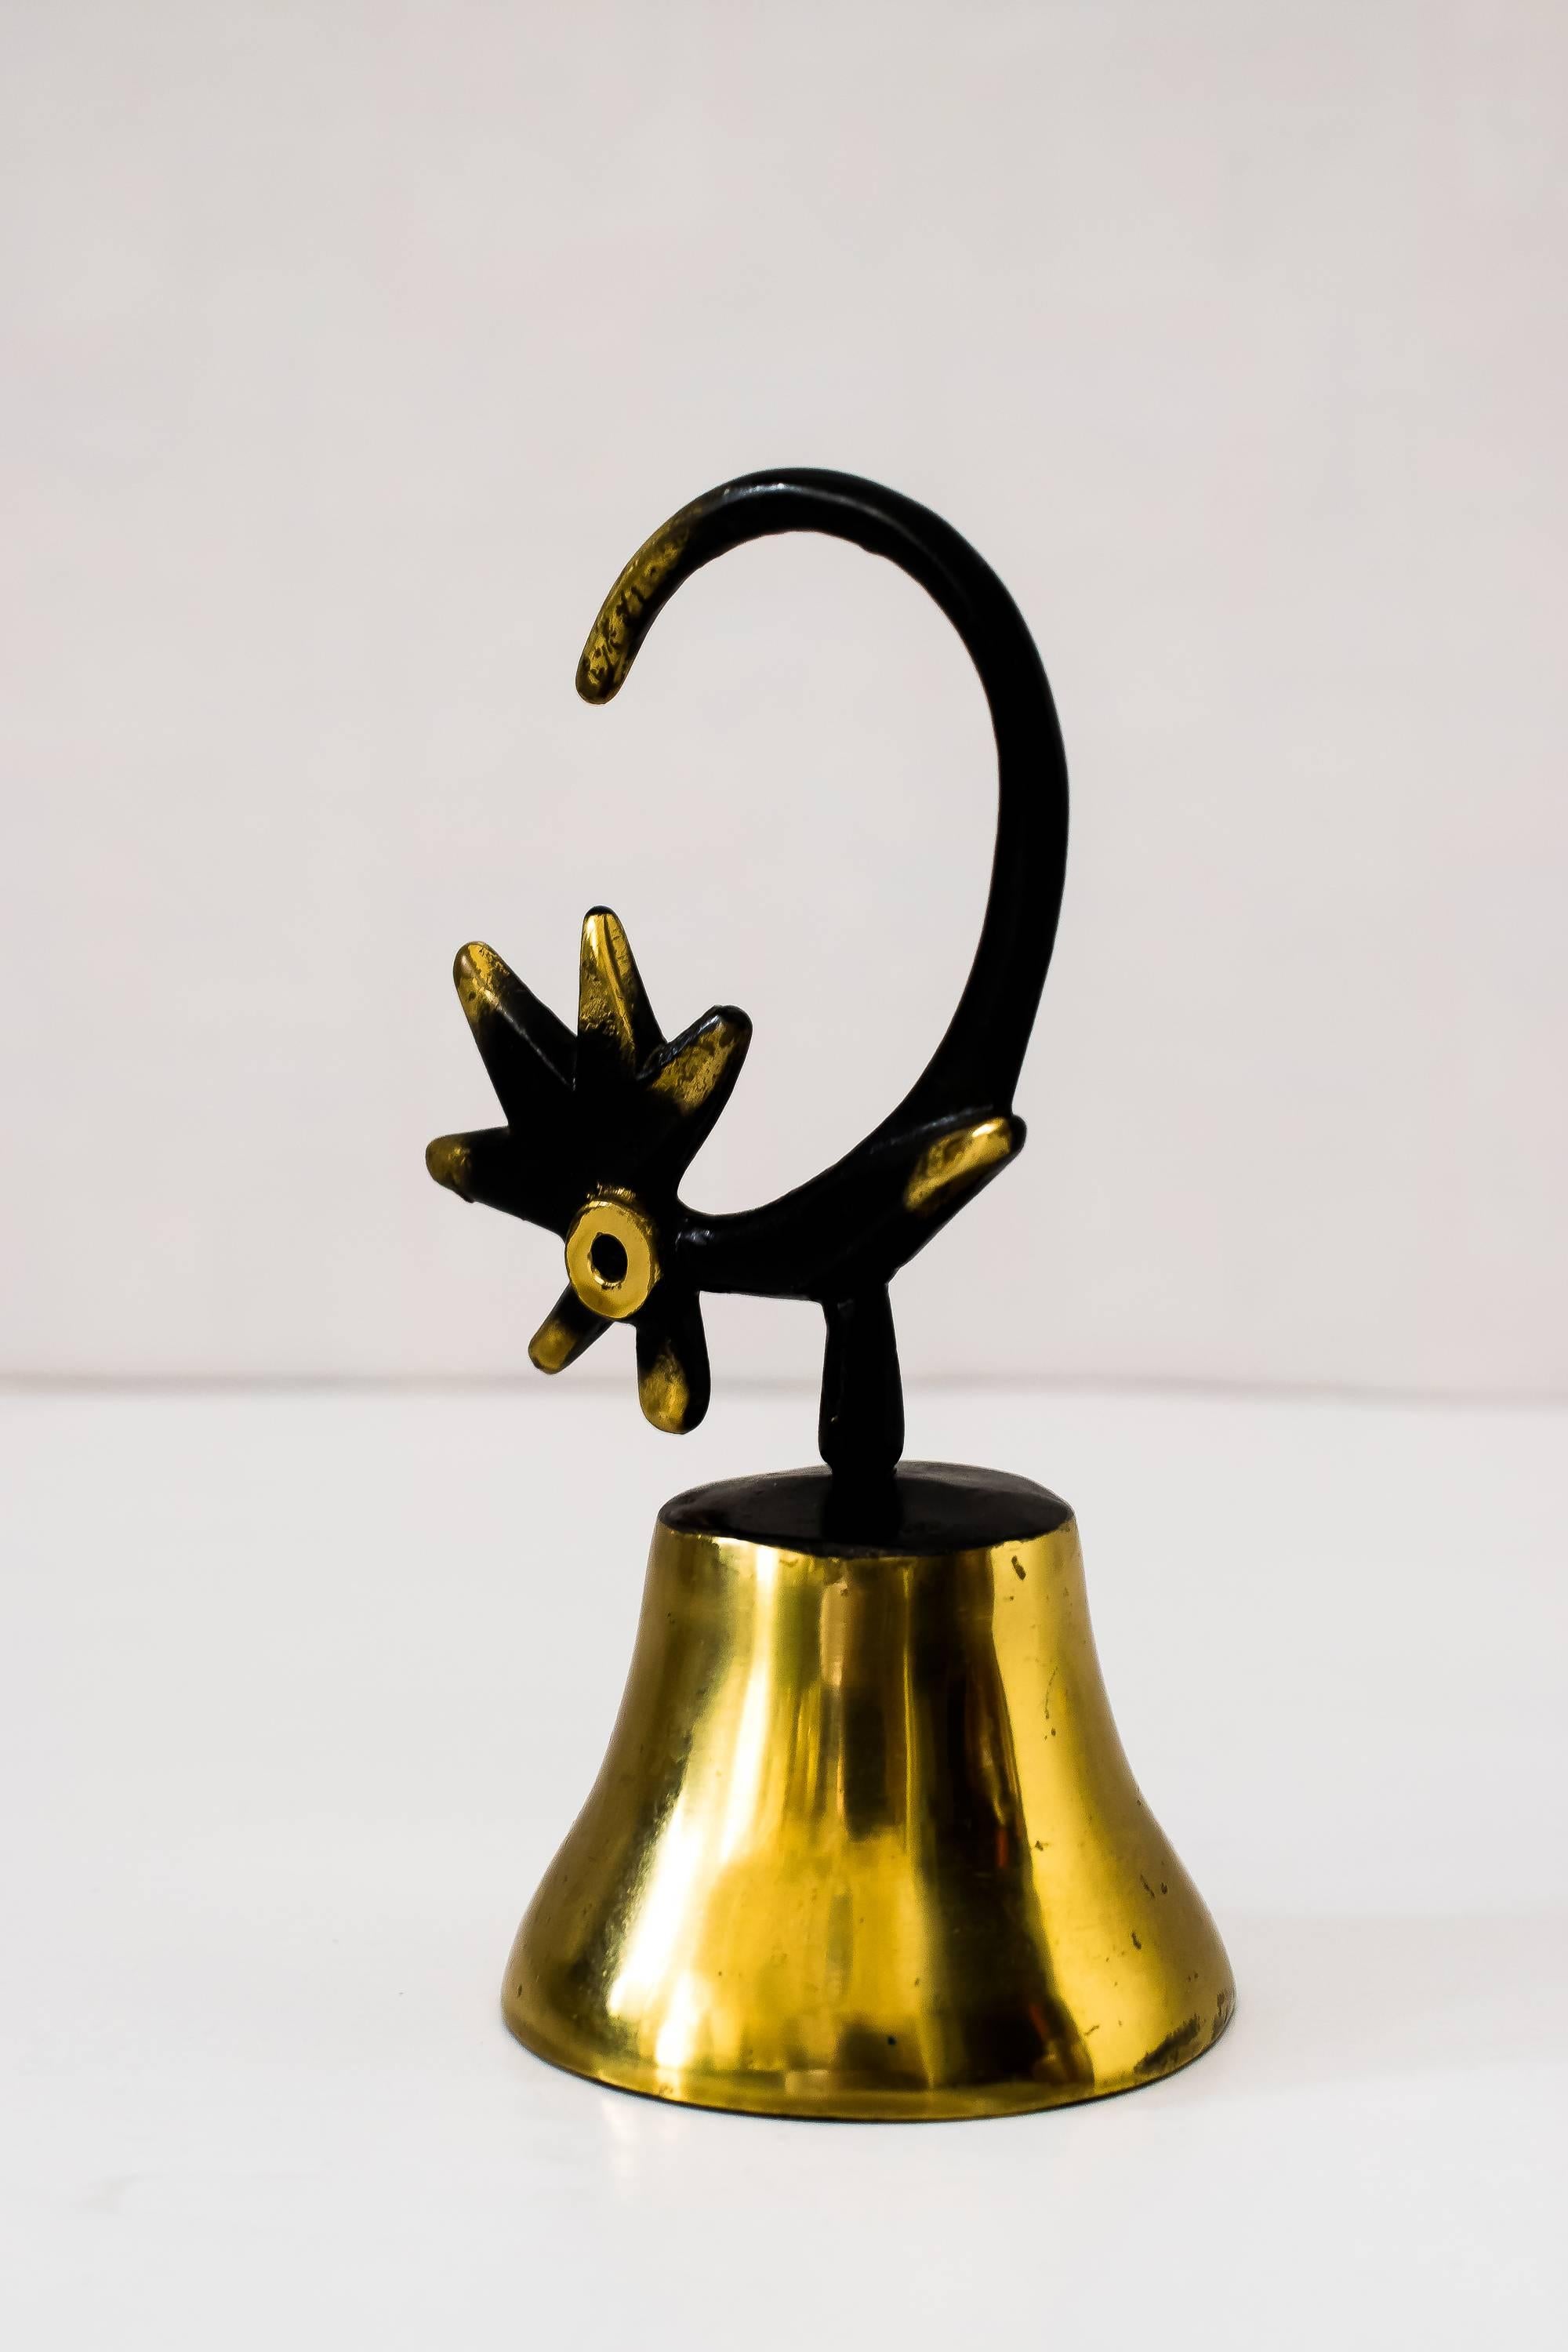 Walter Bosse rooster dinner bell, 1950s
Original condition.